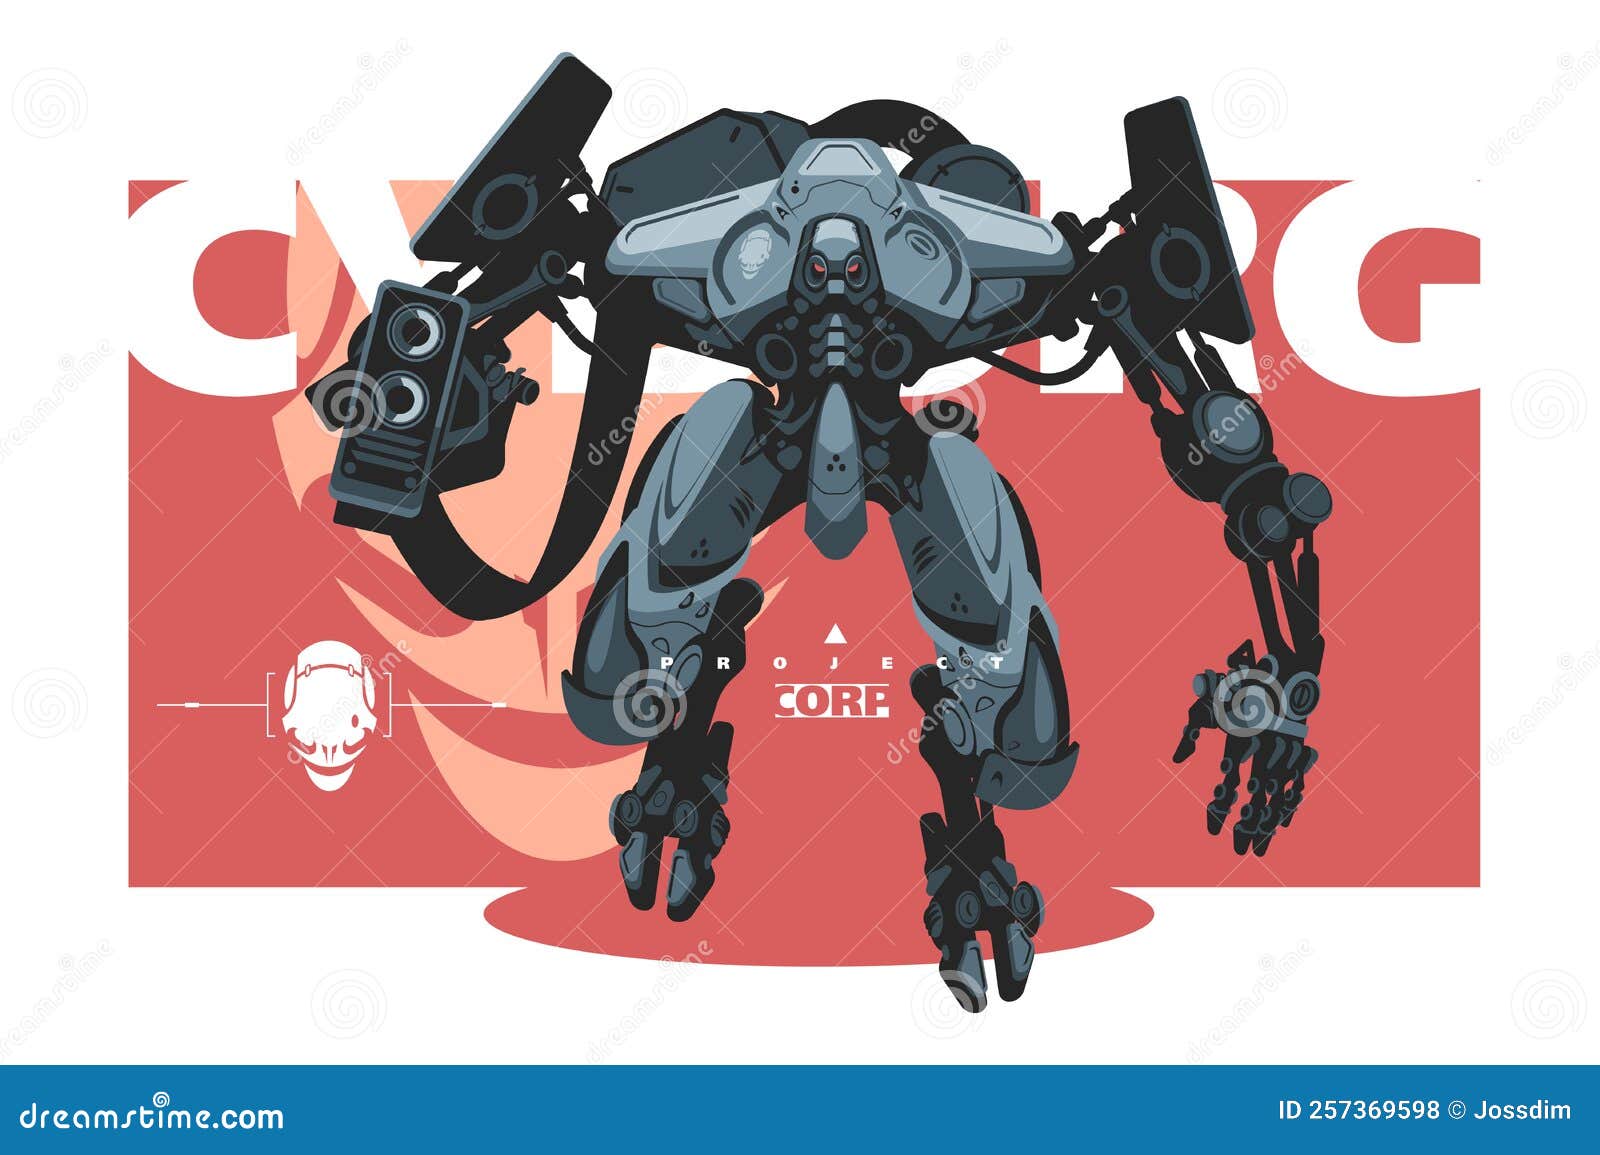 cyborg, cybernetic military robot or modified corp